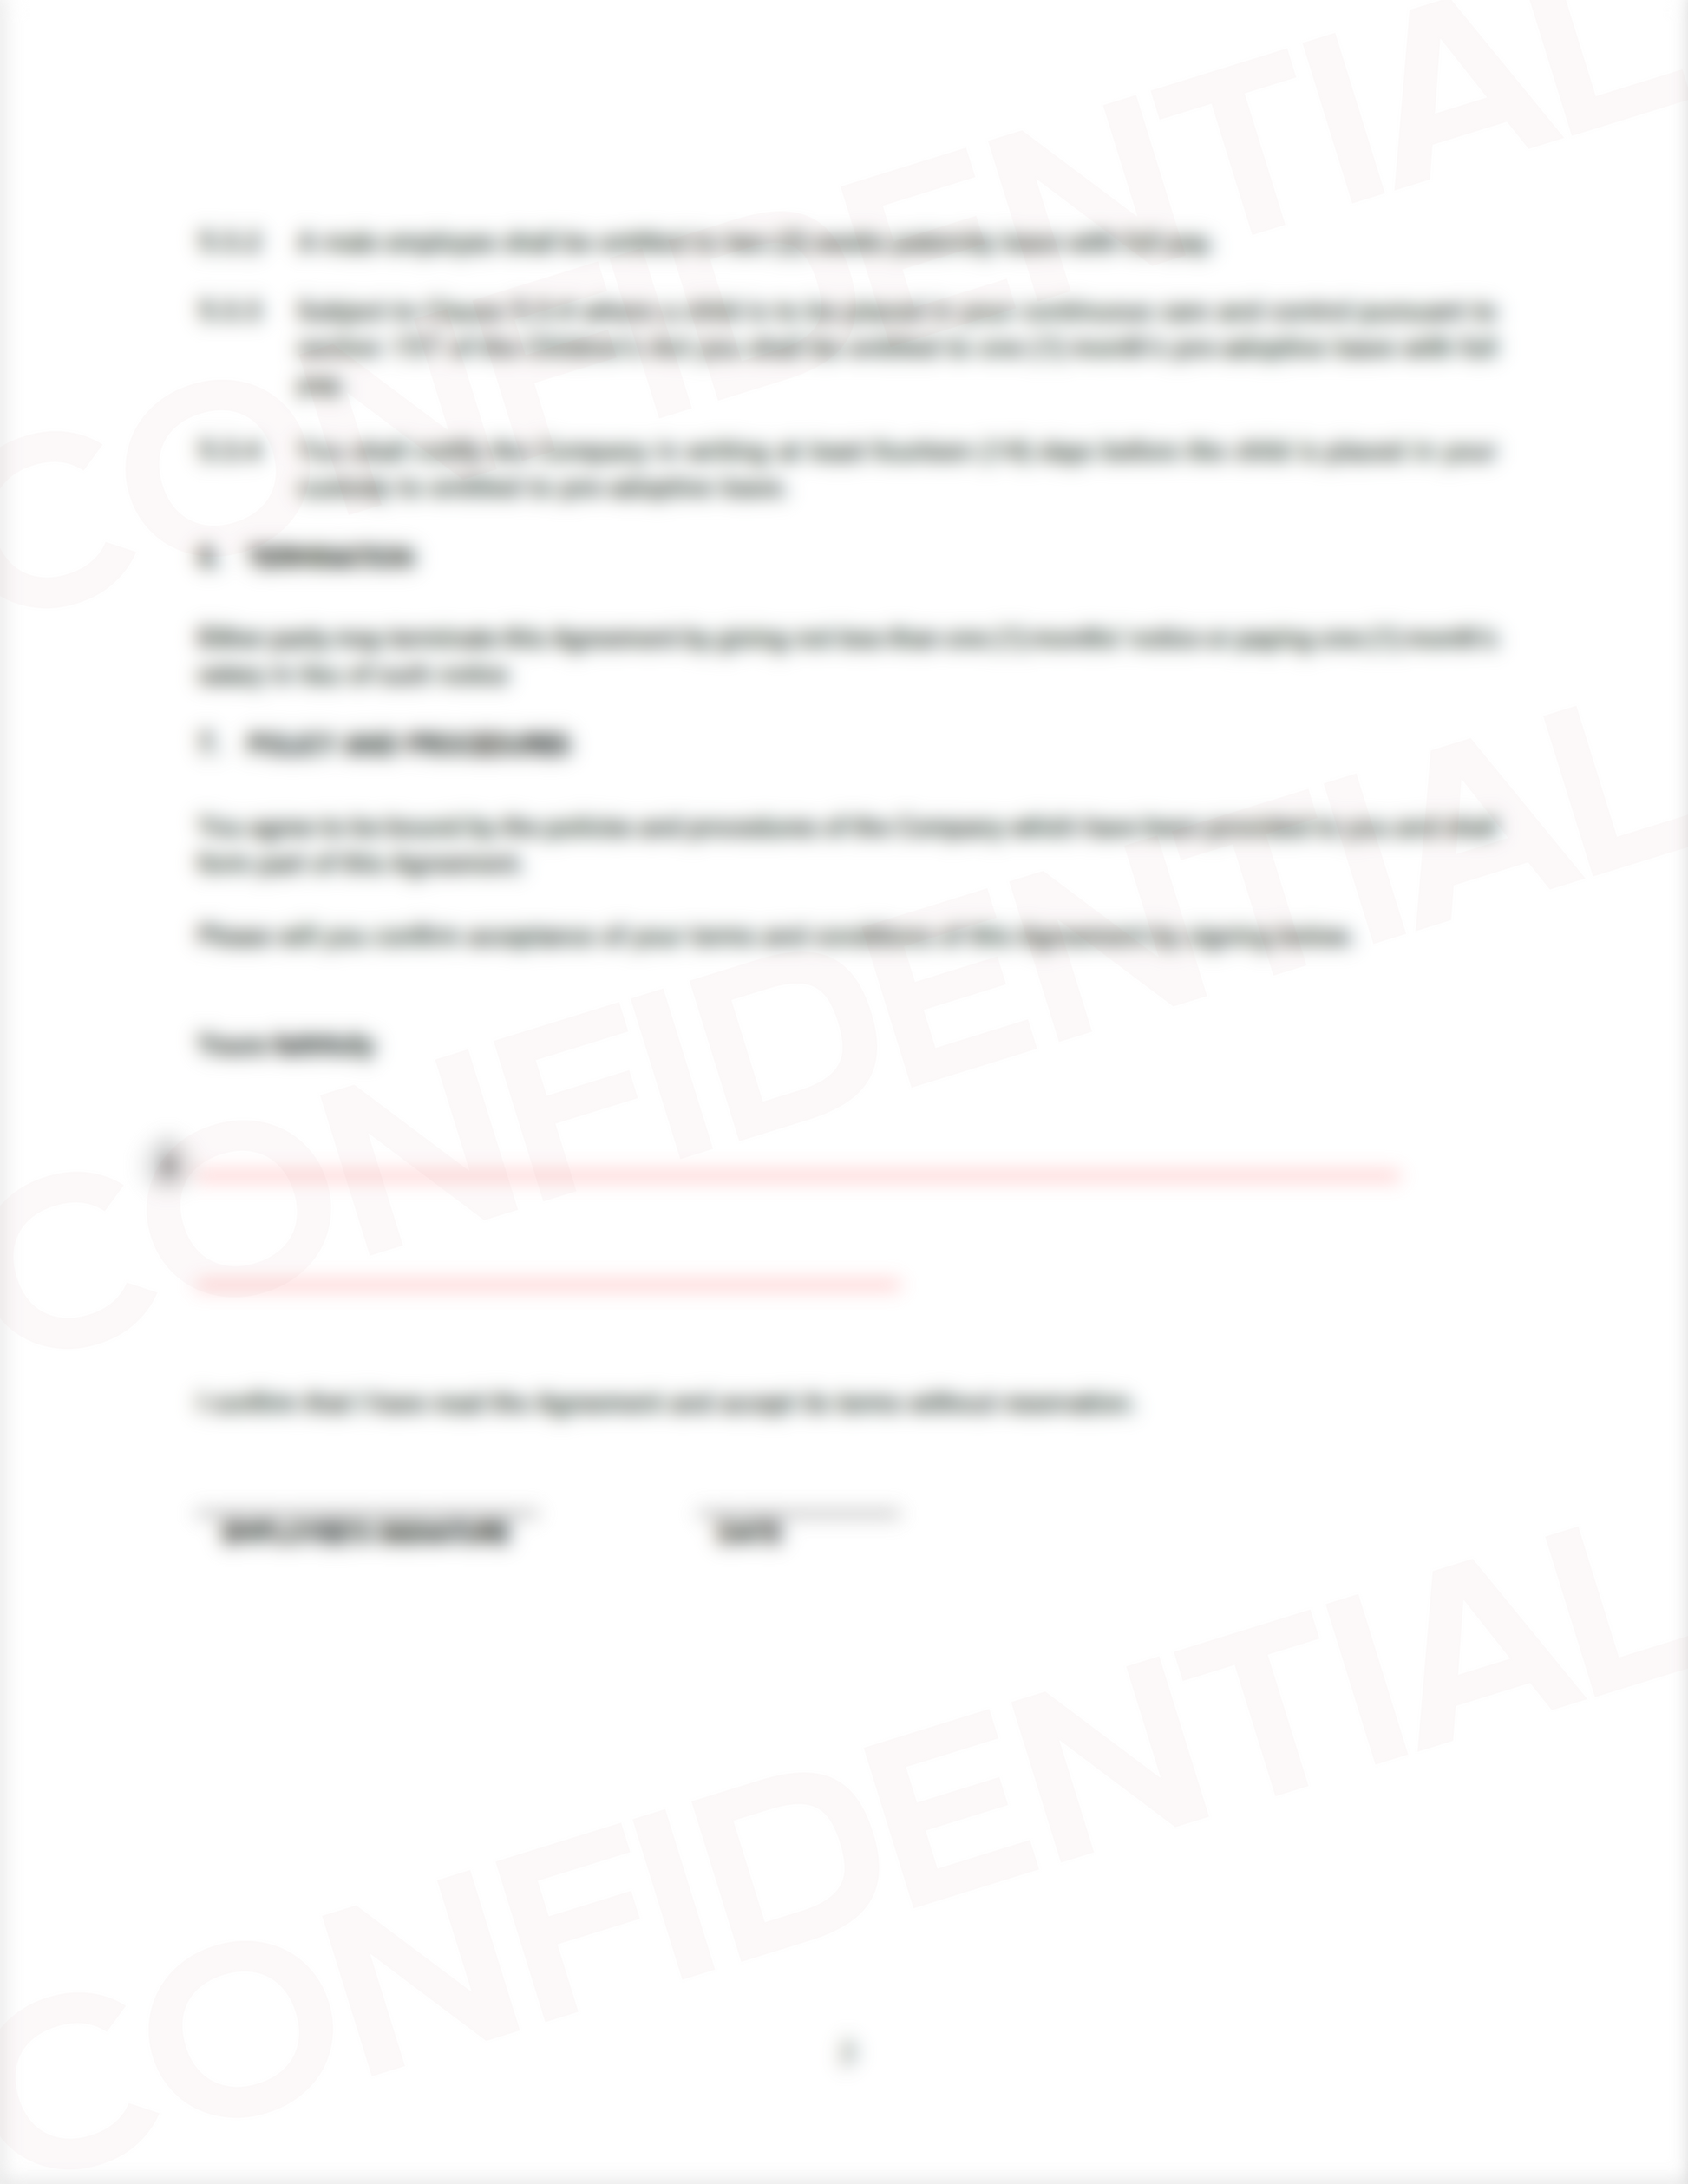 Permanent Employment Agreement template - Legal document for employer and employee rights blurred